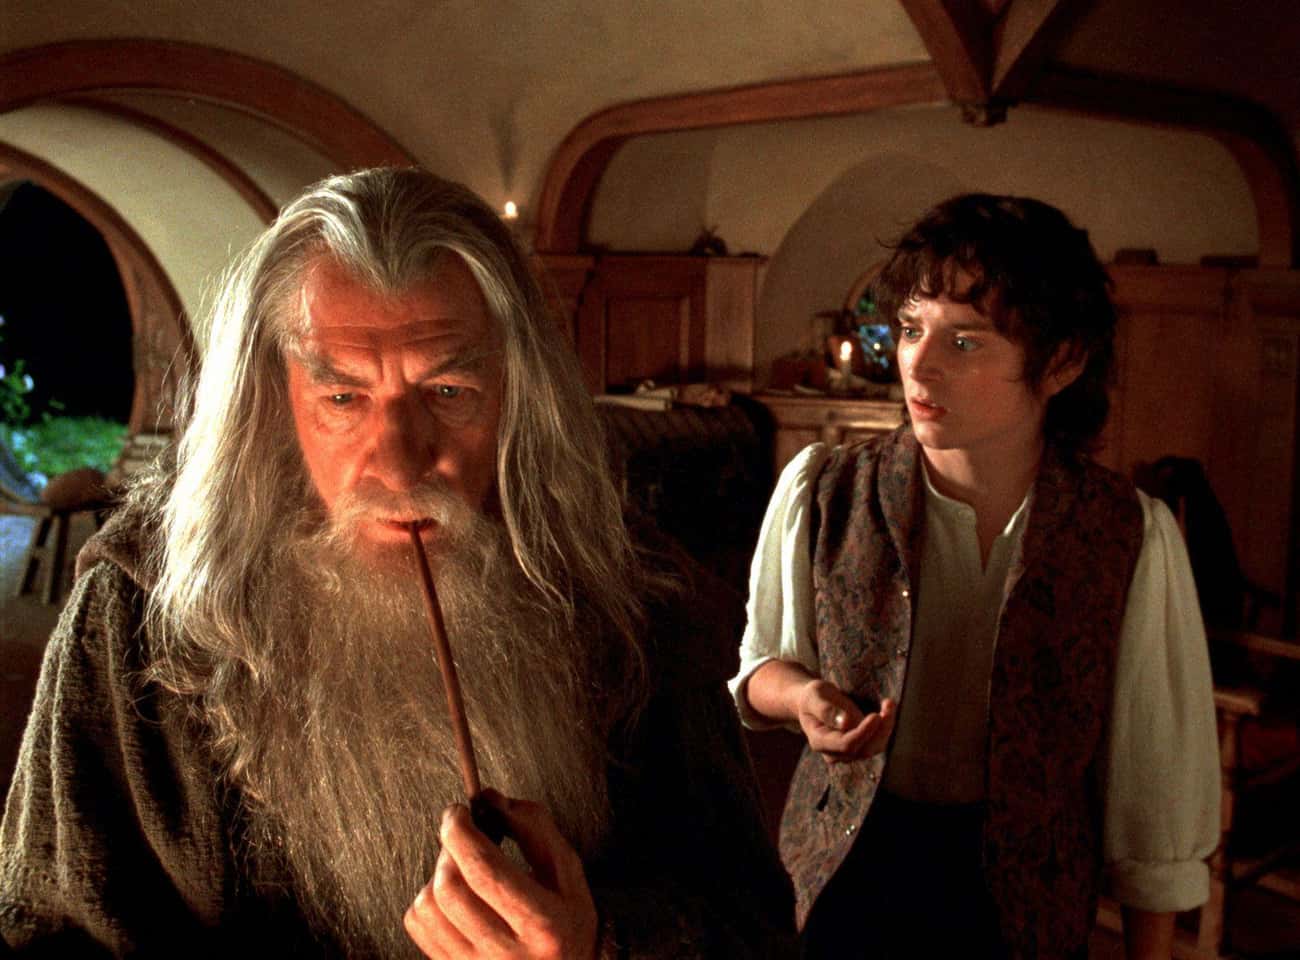 Gandalf Allowed the Other Hobbits to Go on the Journey in Case Anything Happened to Frodo